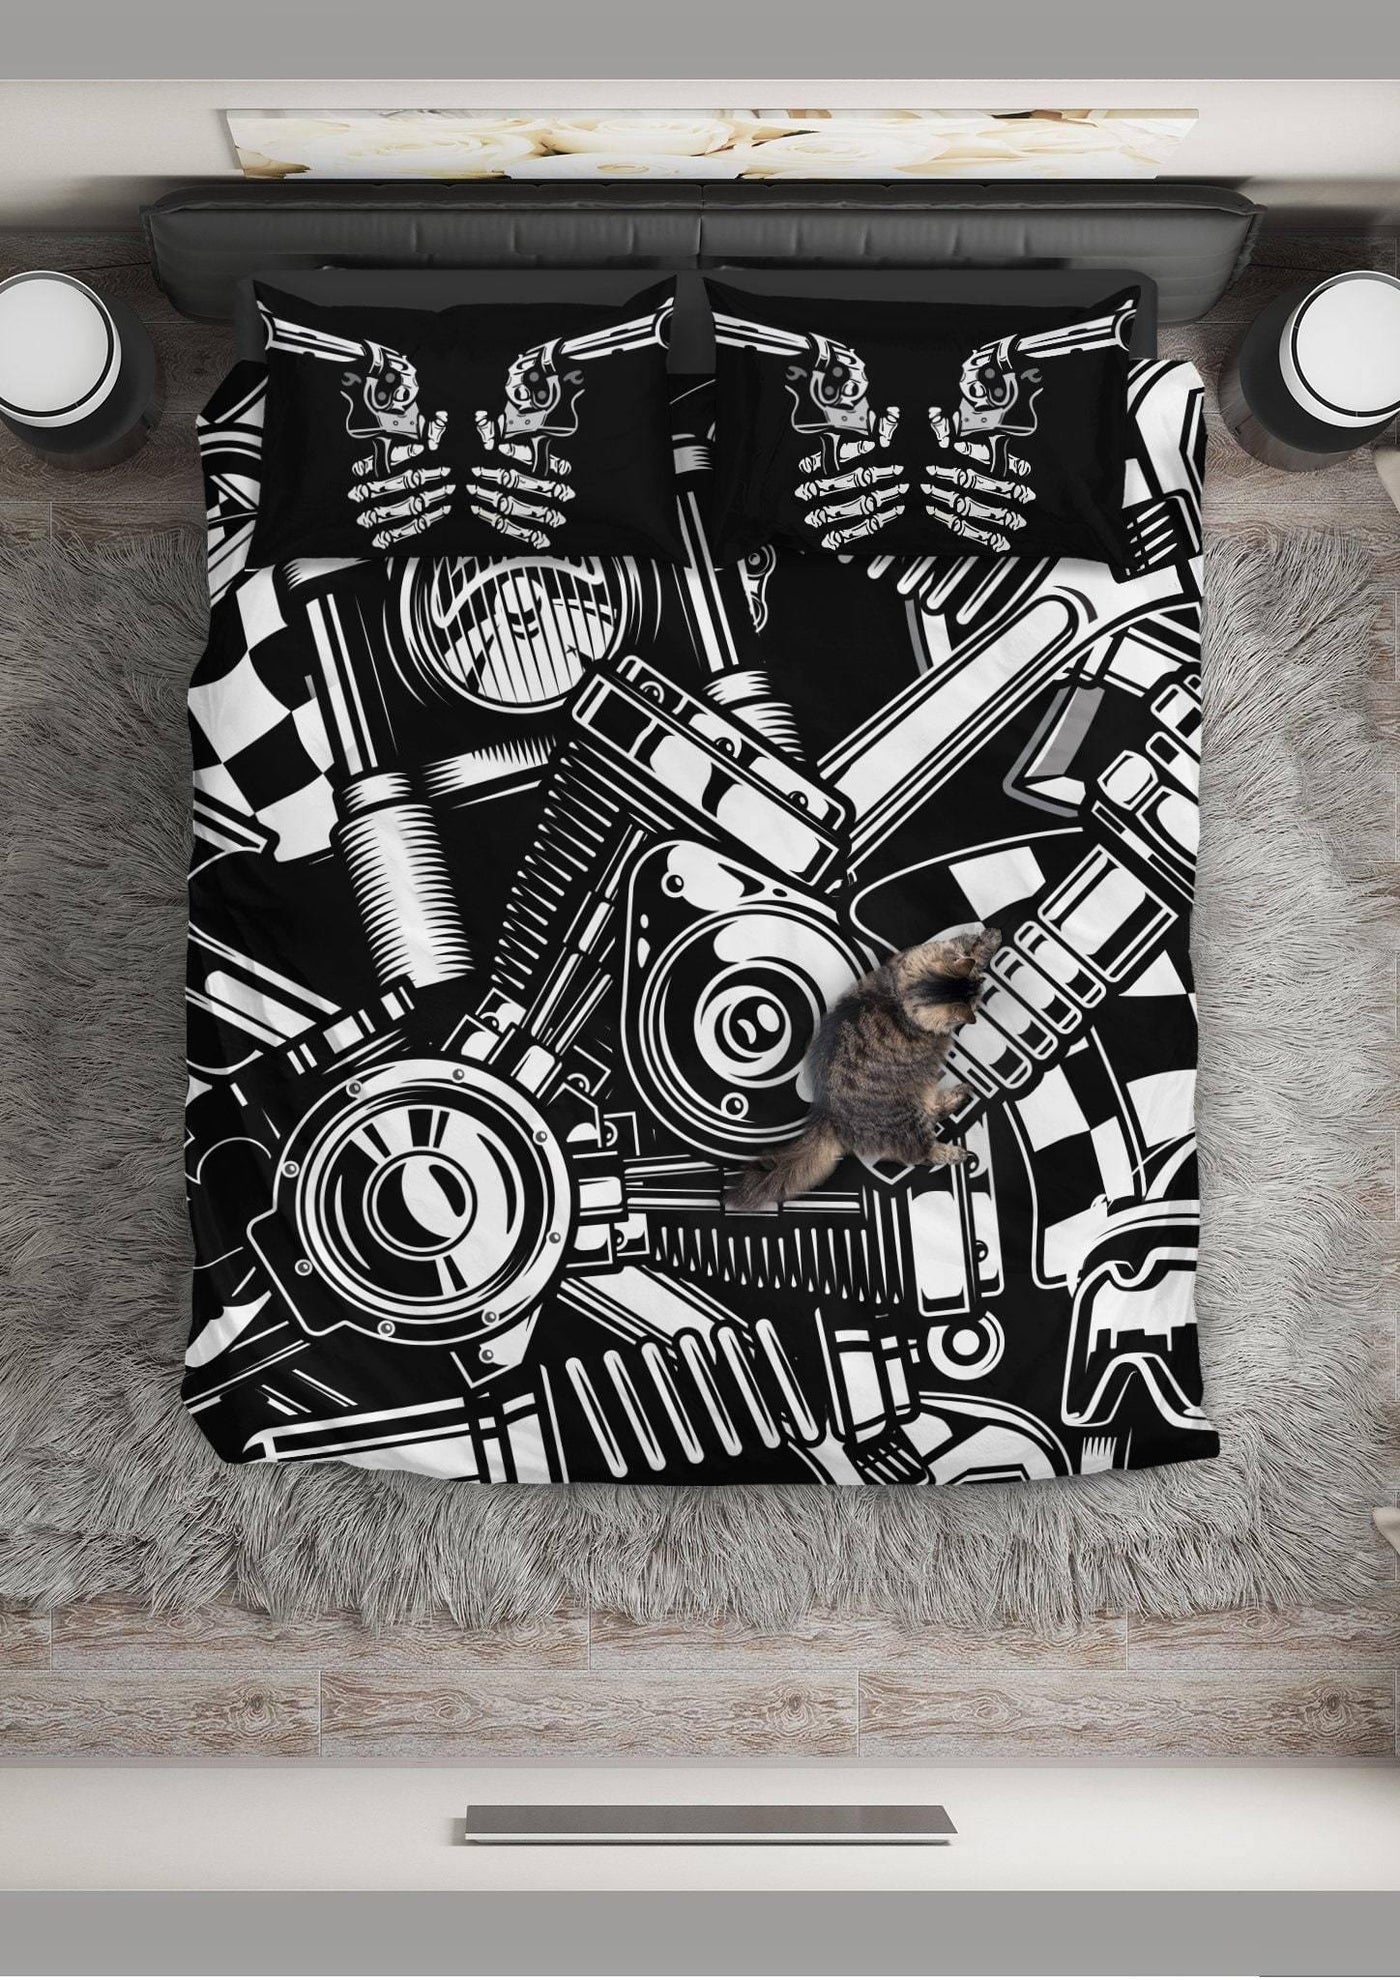 Biker Tools Bedding Set (1 Duvet Cover, 2 Pillowcases), Polyester, Size Twin-Queen-King, Black/White - American Legend Rider